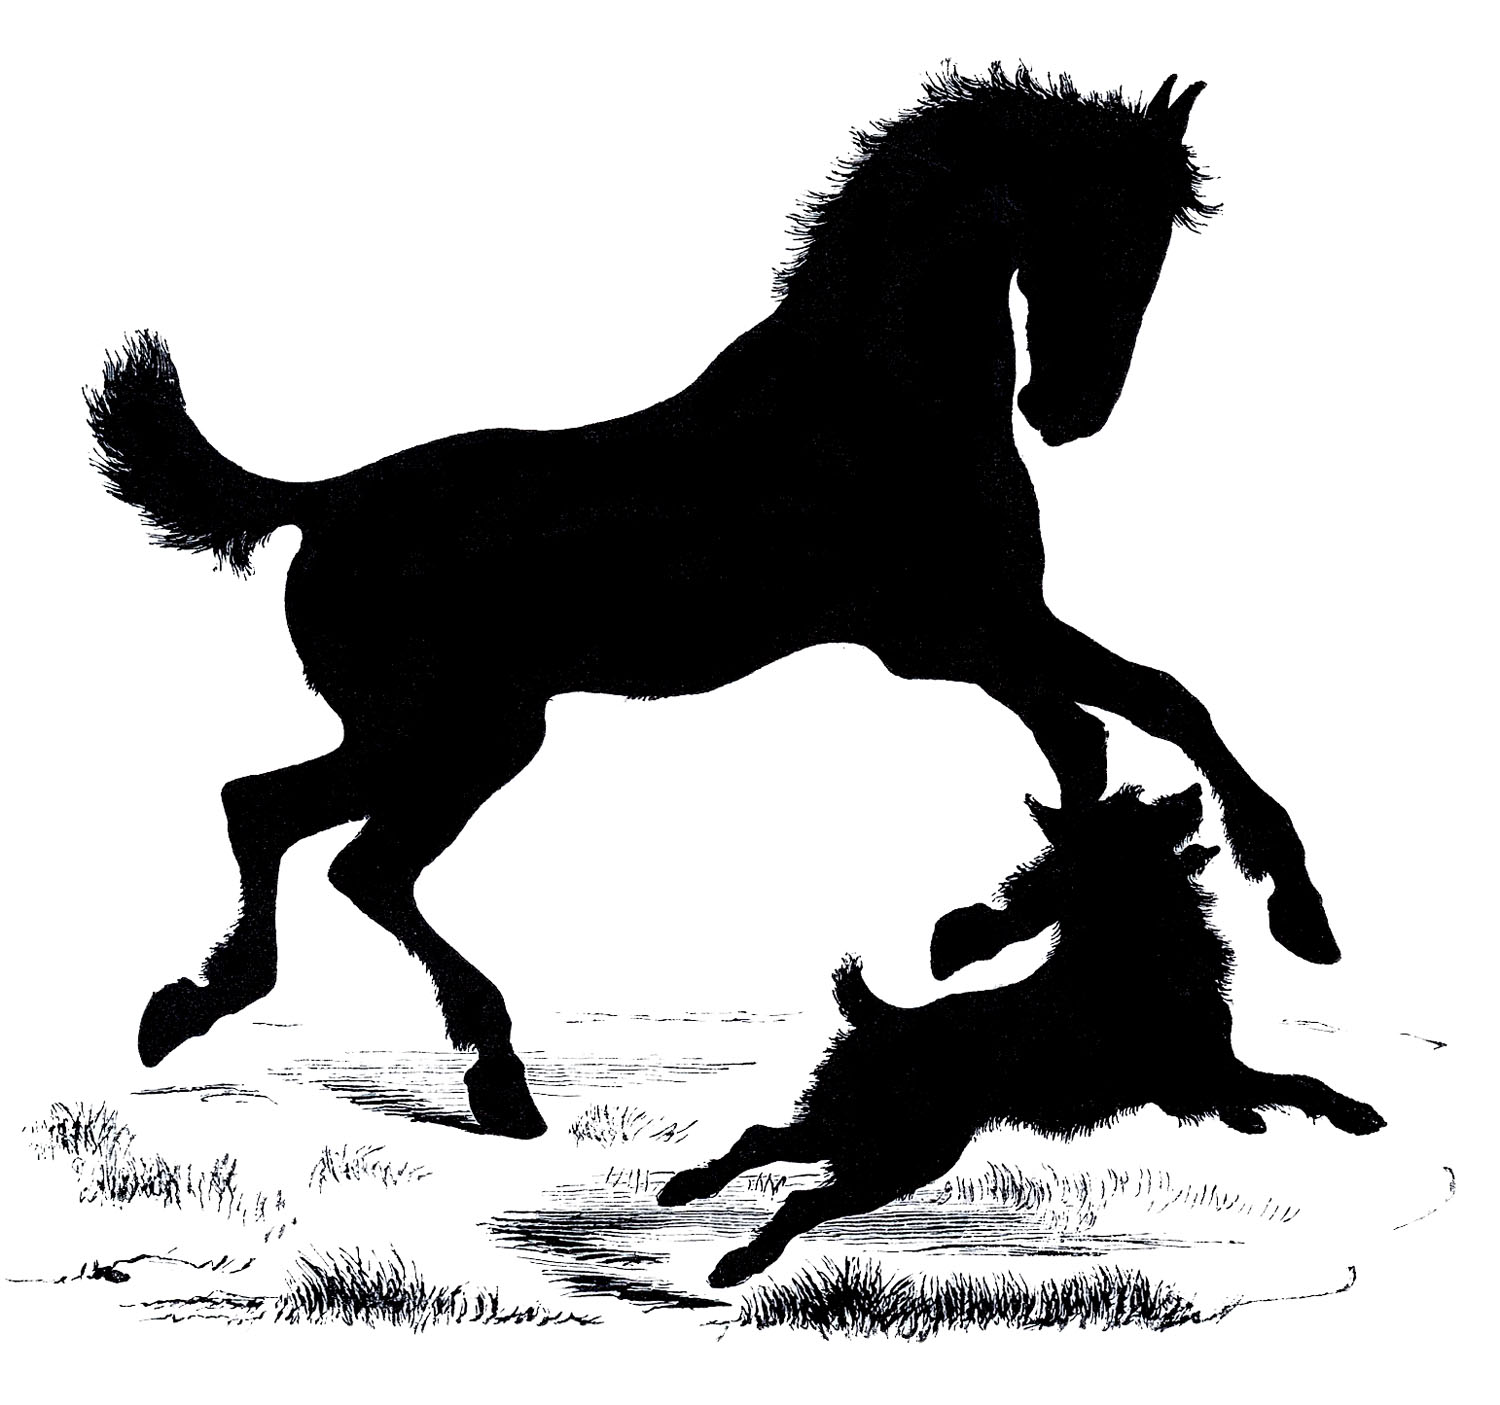 Free Vector Downloads - Silhouette Horse and Dog - The Graphics Fairy